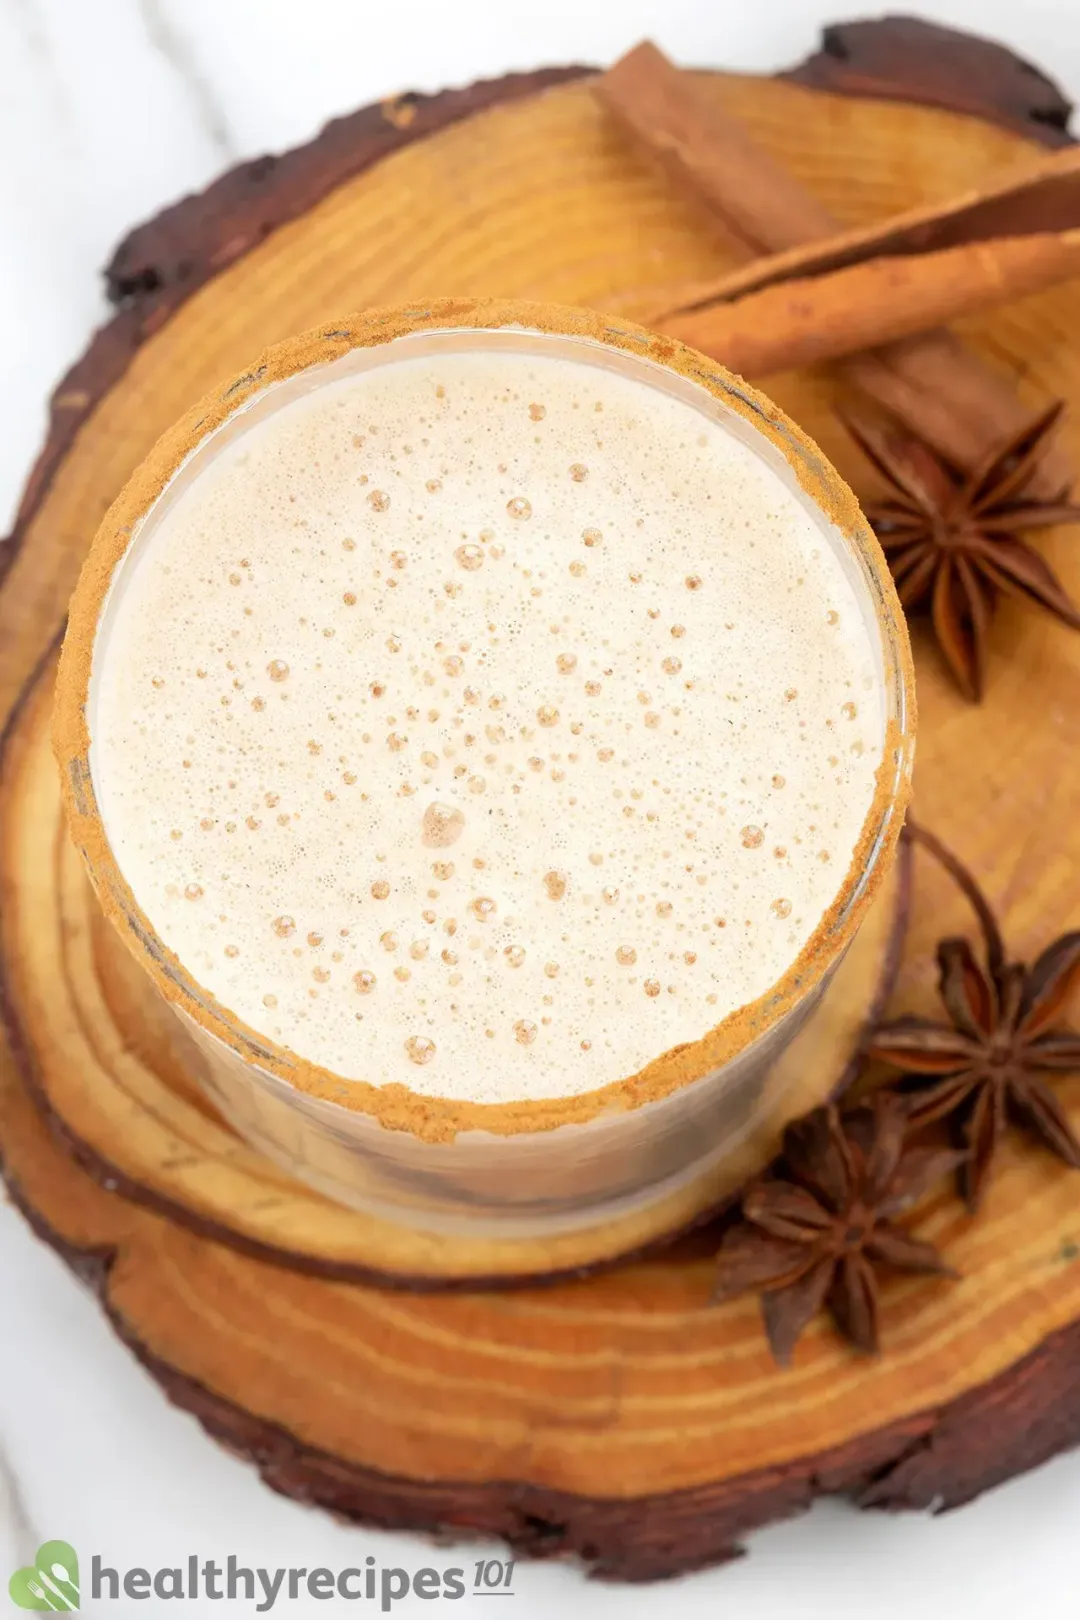 A foamy frothy eggnog inside a glass with star anise around on a wooden coaster